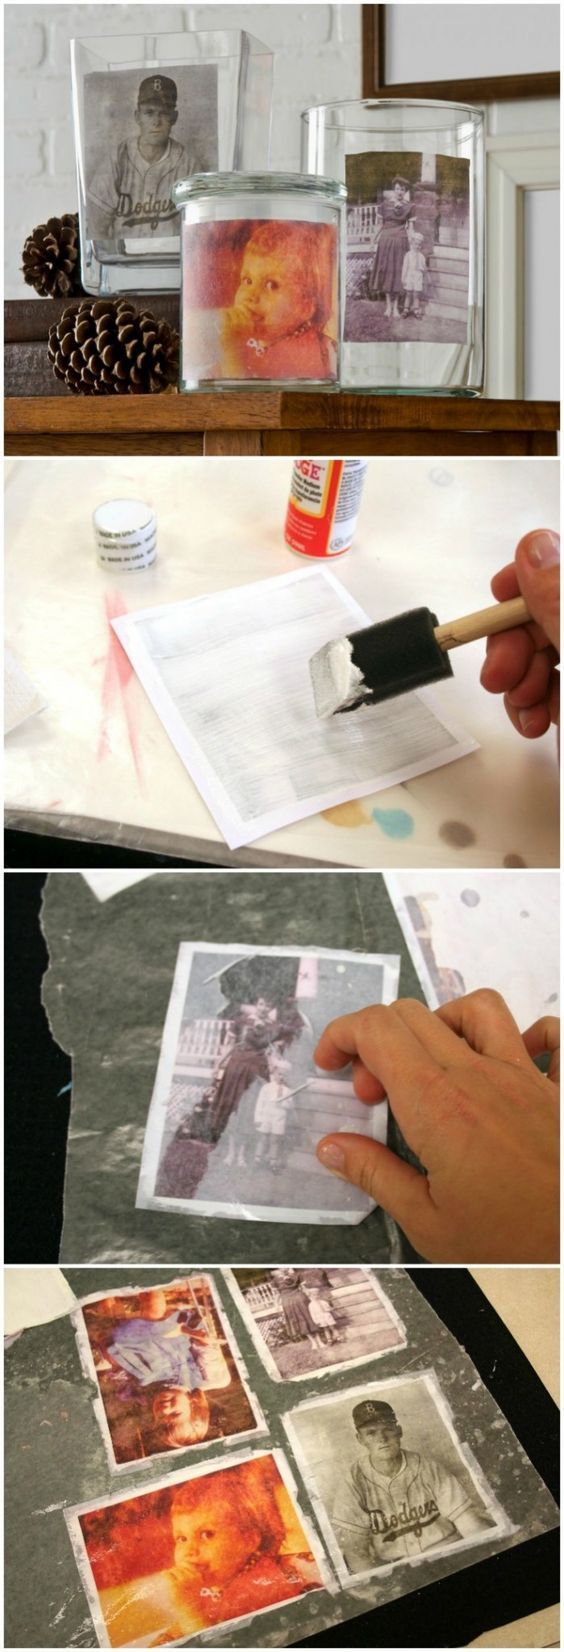 VINTAGE MOD PODGE PHOTO TRANSFER TO VASES -   Ideas for Photo Transfer Projects